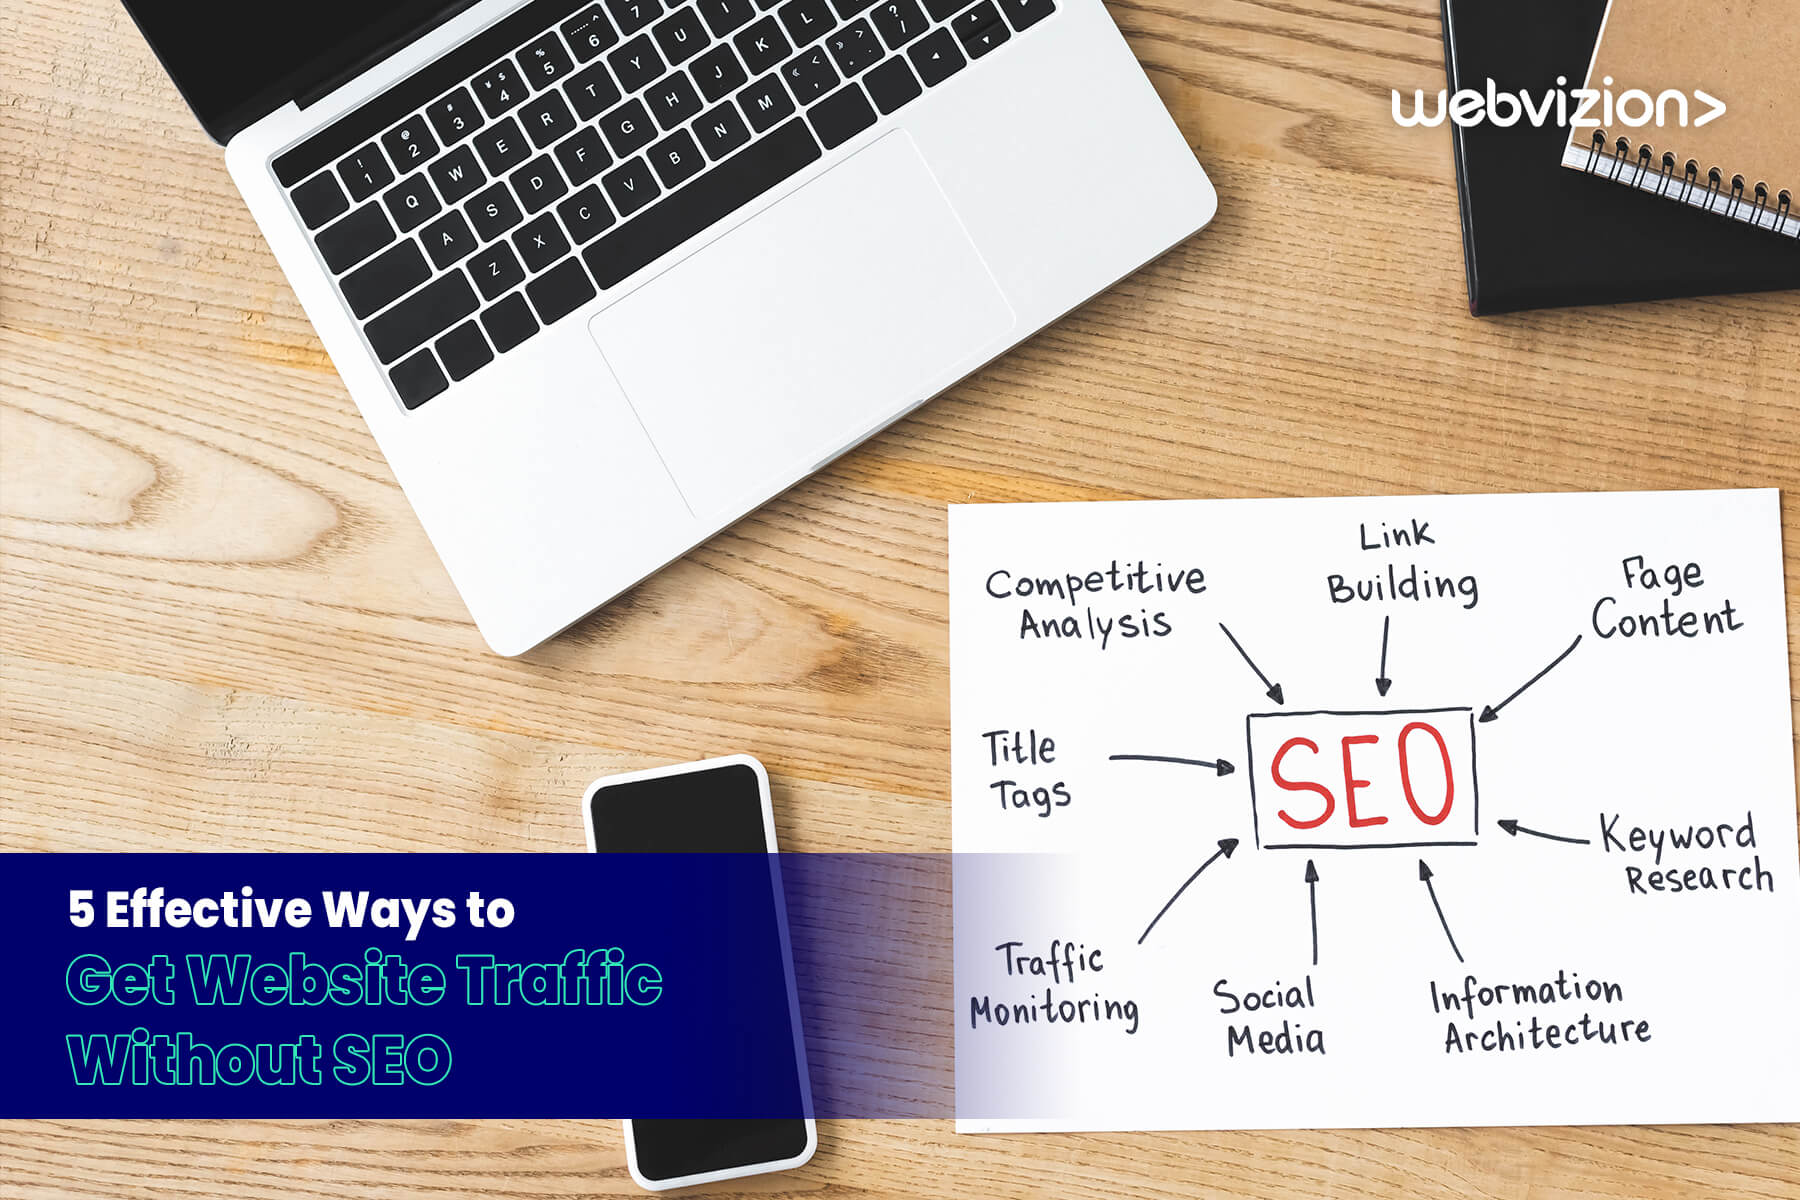 5 Effective Ways to Get Website Traffic Without SEO